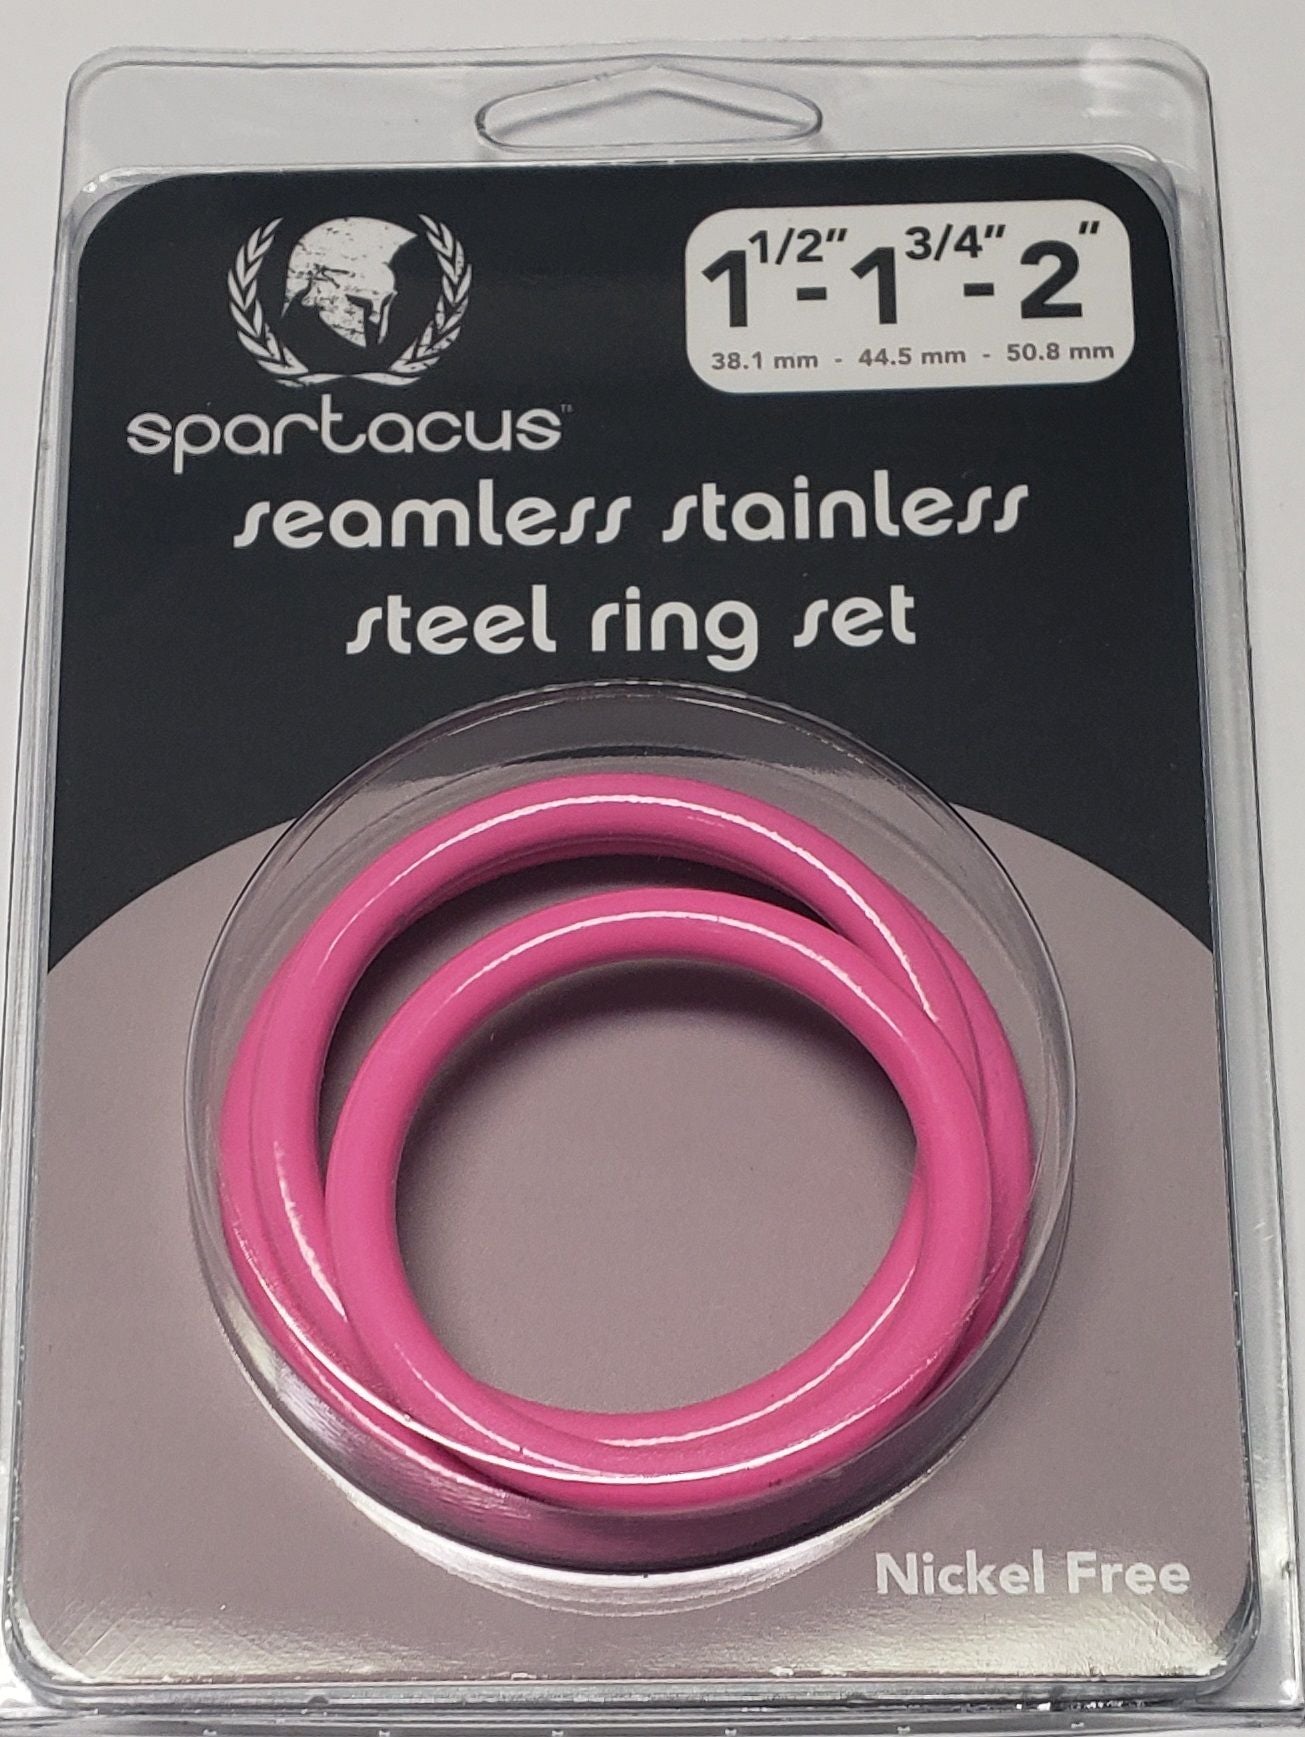 The pink Seamless Stainless Steel Ring Set.